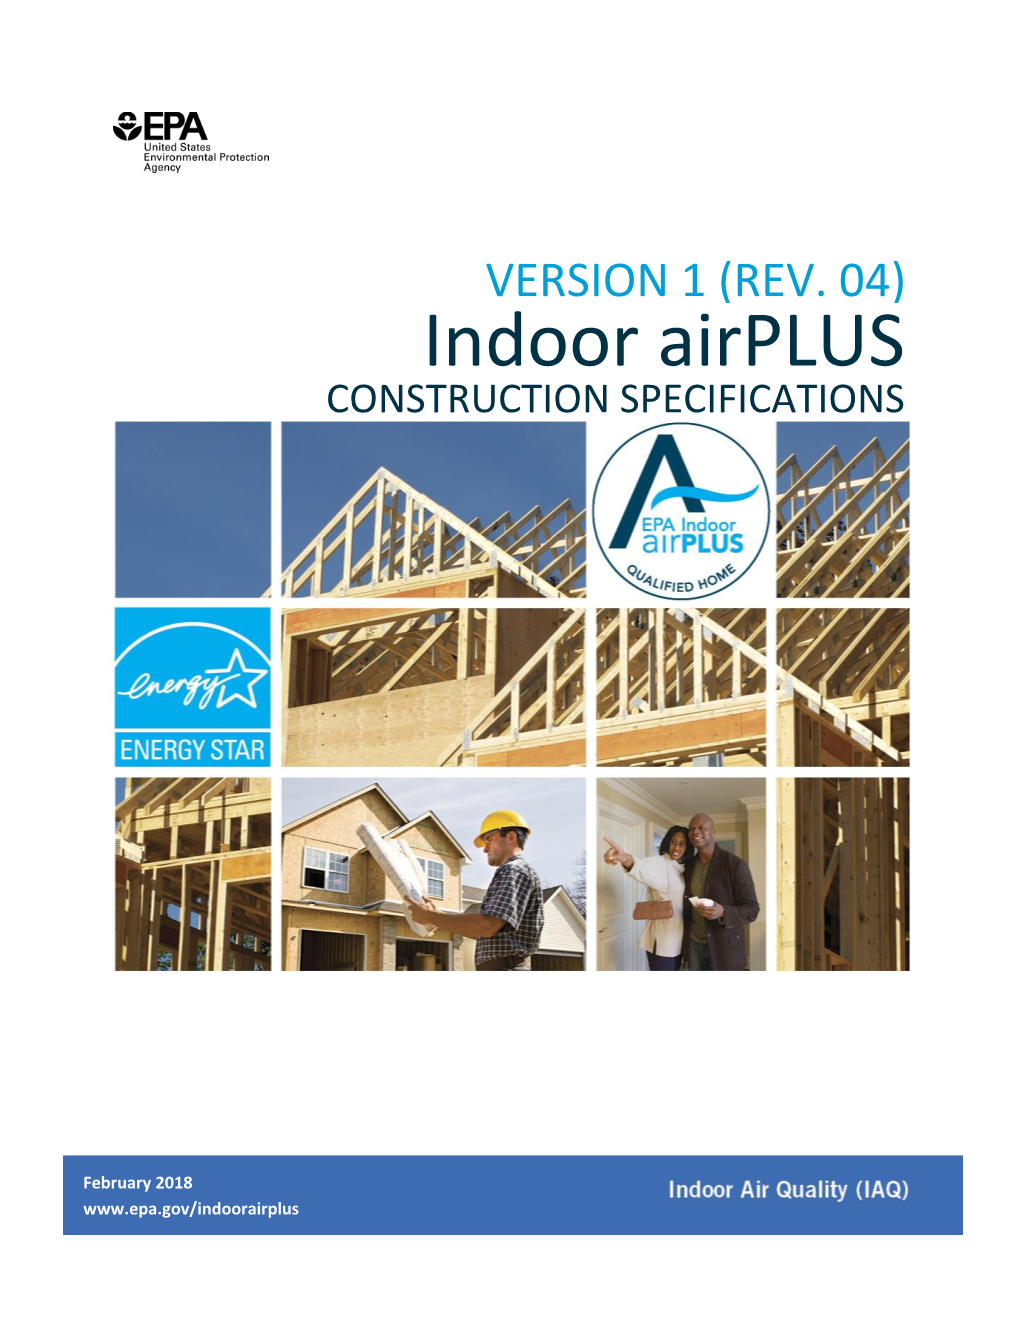 Indoor Airplus Version 1 (Rev. 04) Construction Specifications (February 2018) 1